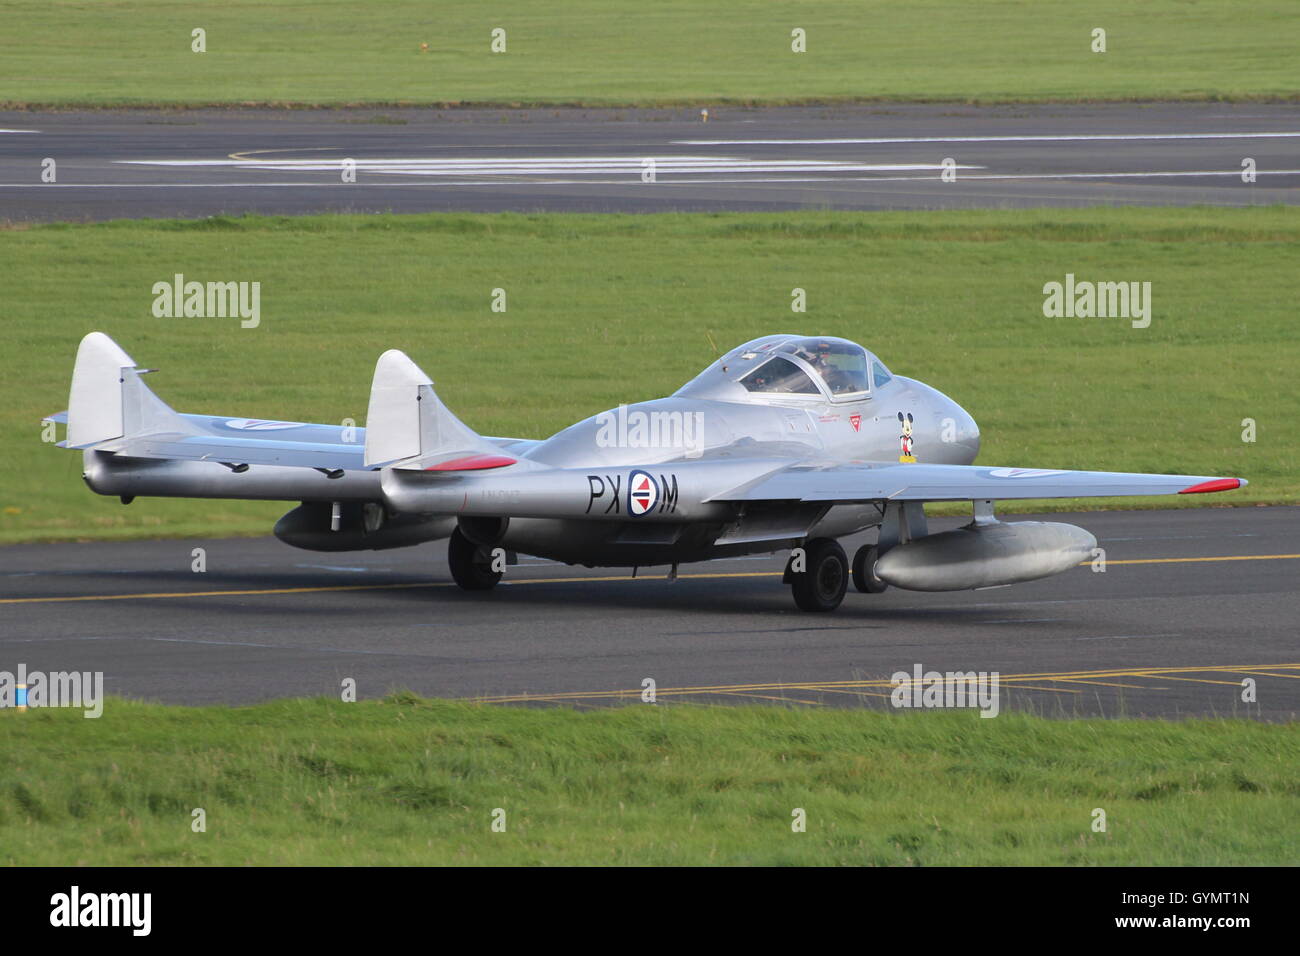 LN-DHZ, a de Havilland Vampire T55 from the Royal Norwegian Air Force Historical Squadron, taxis for departure at Prestwick. Stock Photo